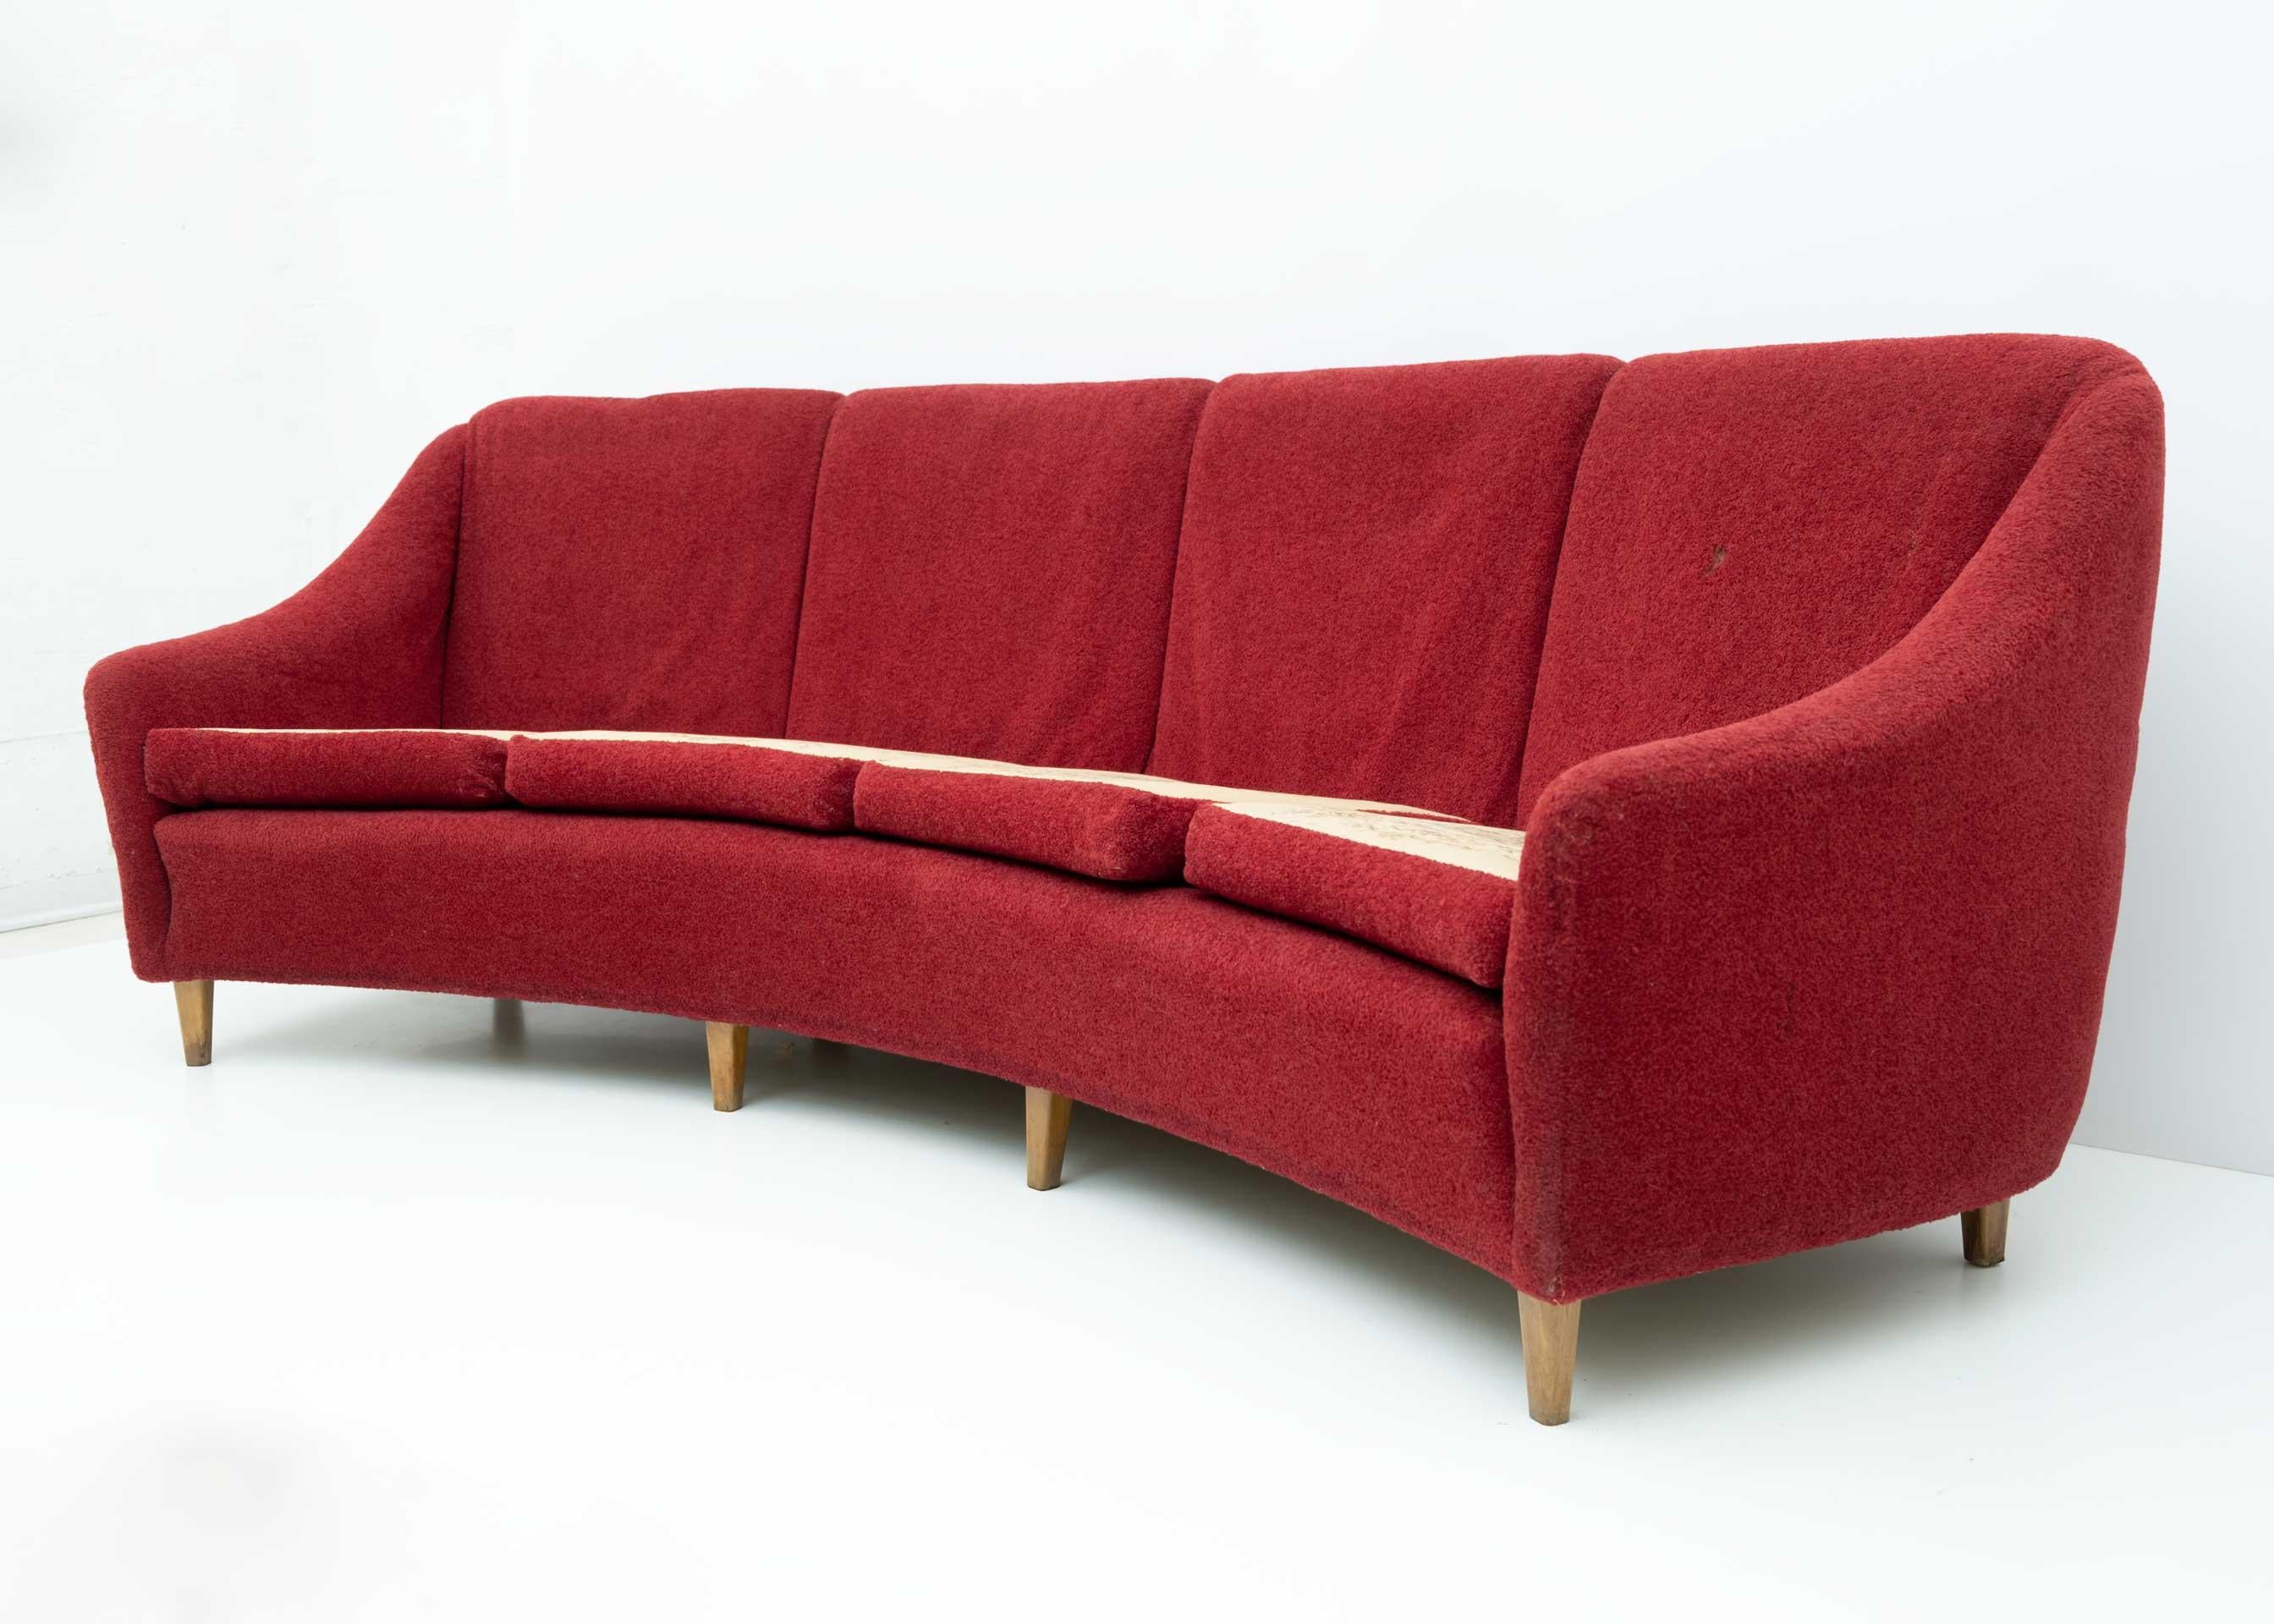 Curved four-seater sofa, Italian design, solid wood structure and legs, original vintage chenille velvet upholstery, 1950s production.
Conditions as shown in the photos, it is advisable to redo the upholstery.